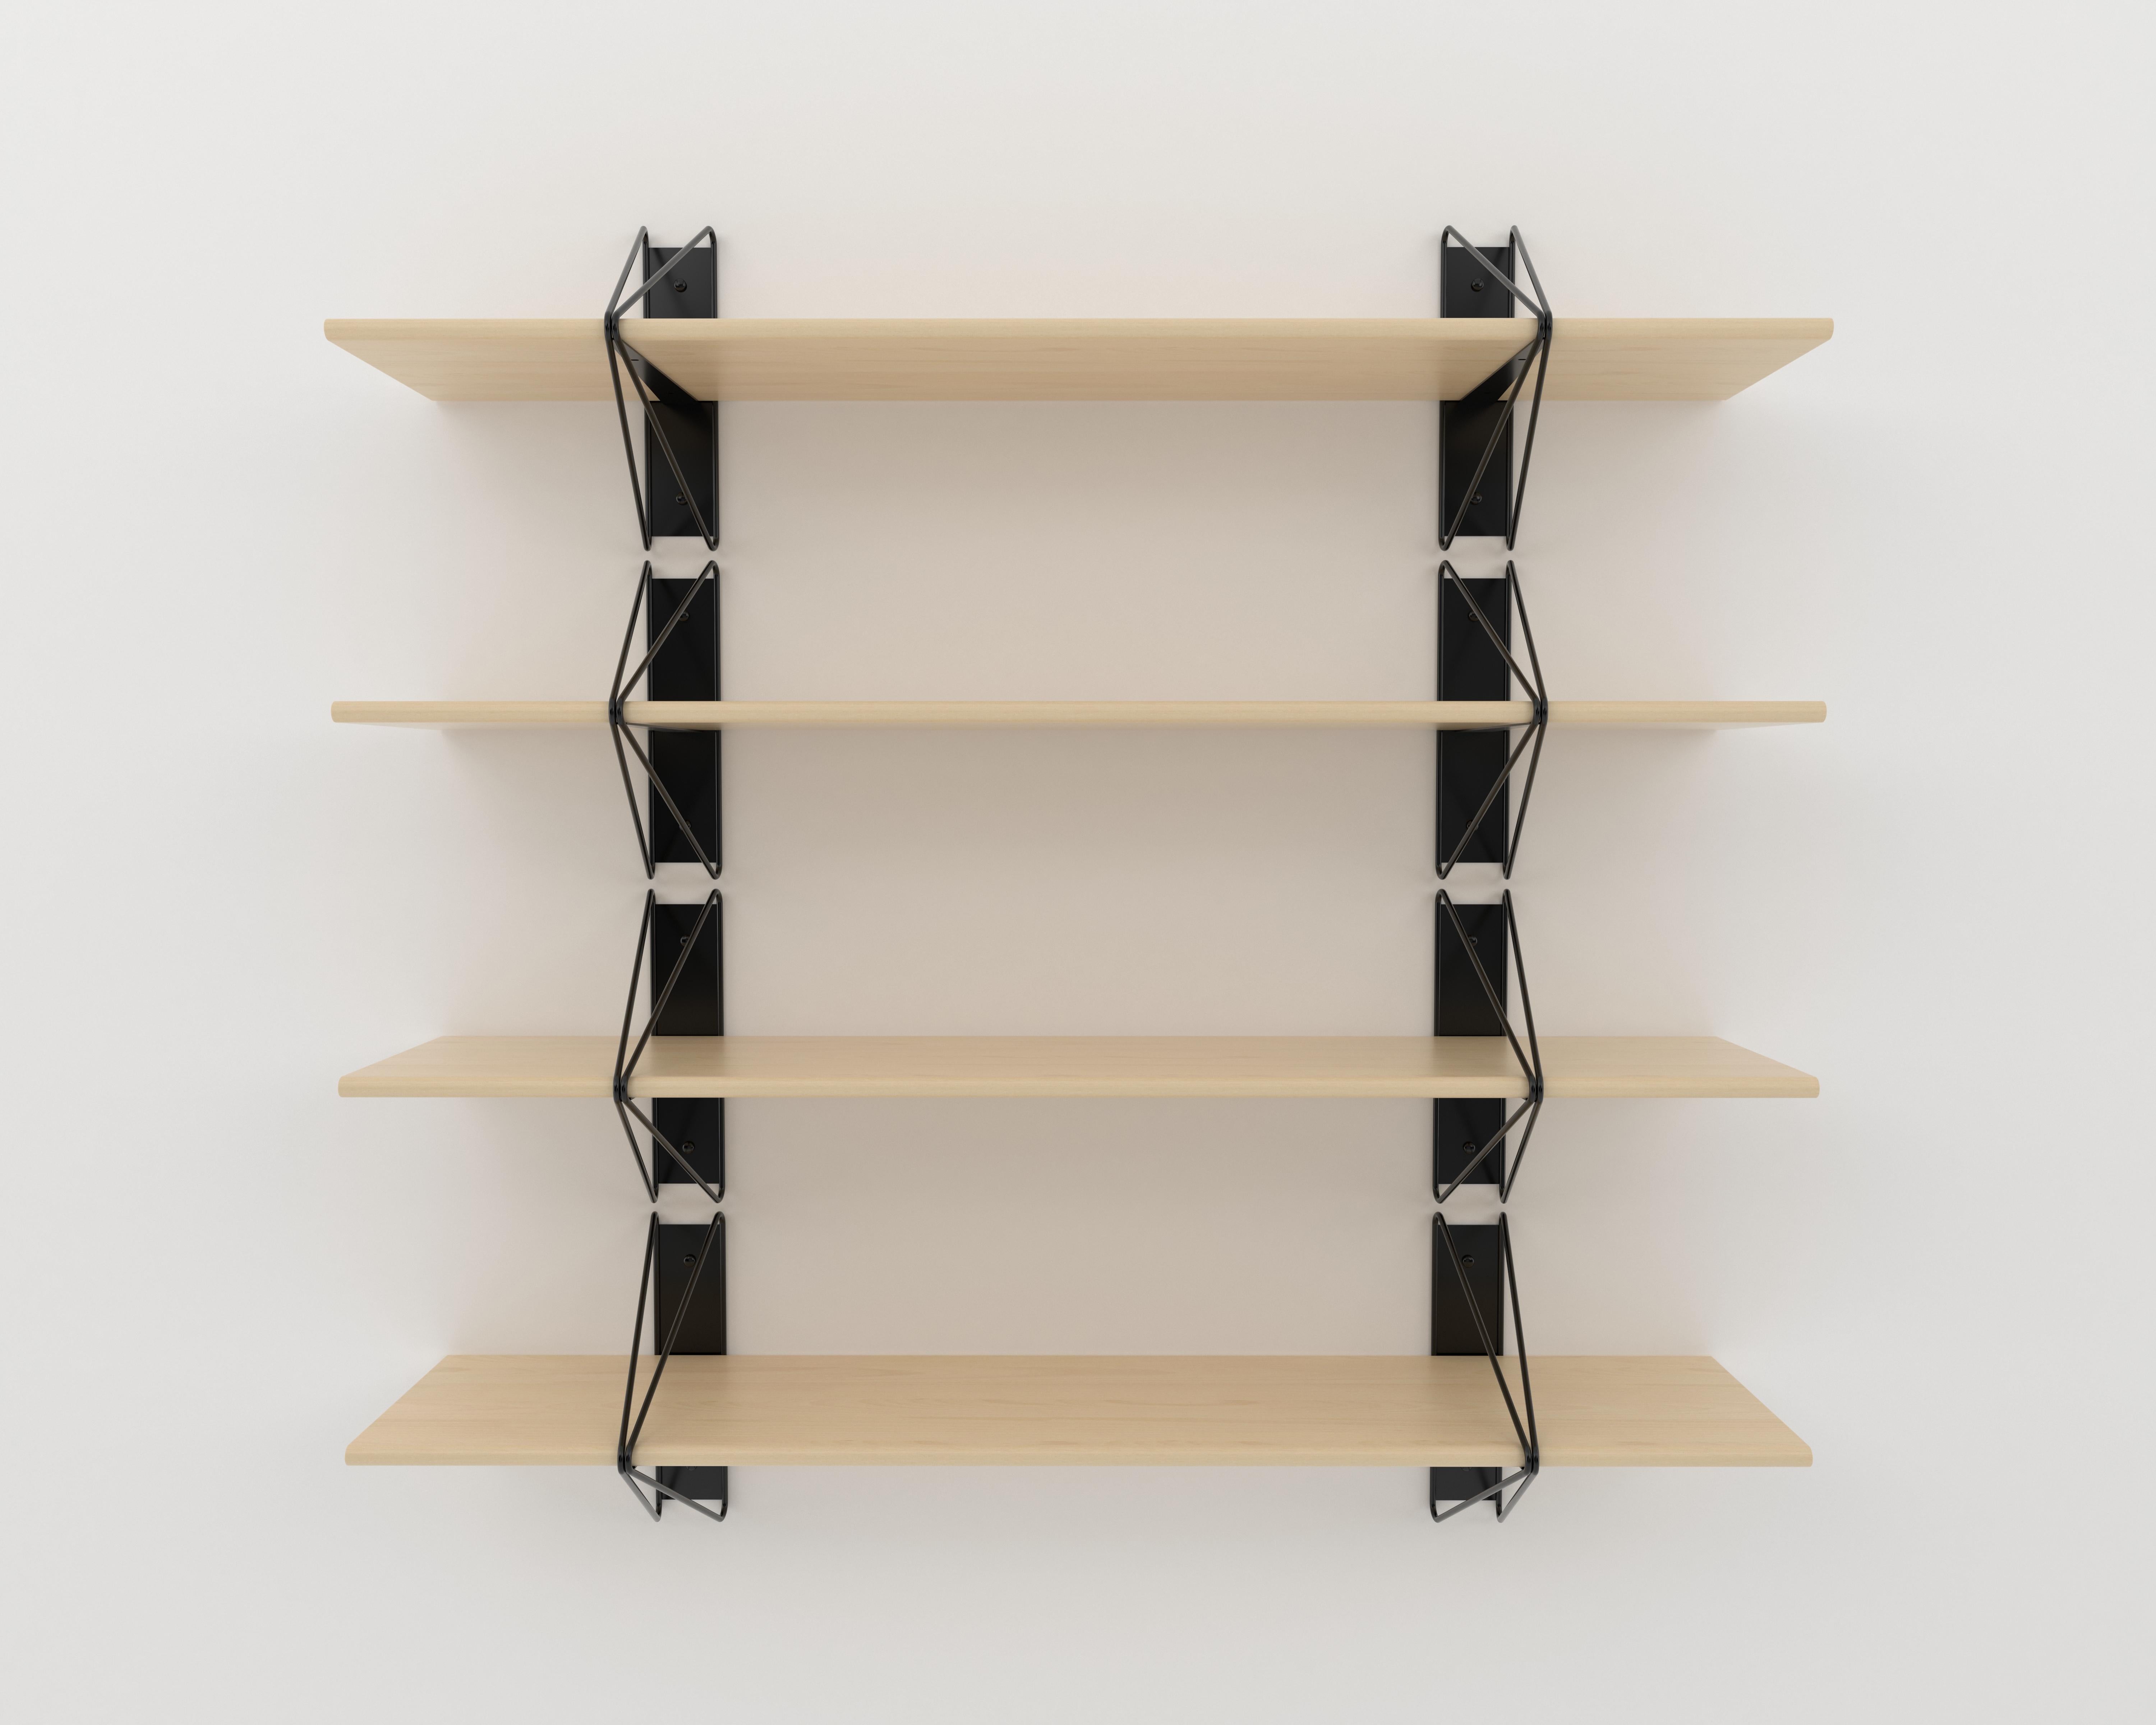 American Set of 5 Strut Shelves from Souda, 116in, Black and Maple, Made to Order For Sale